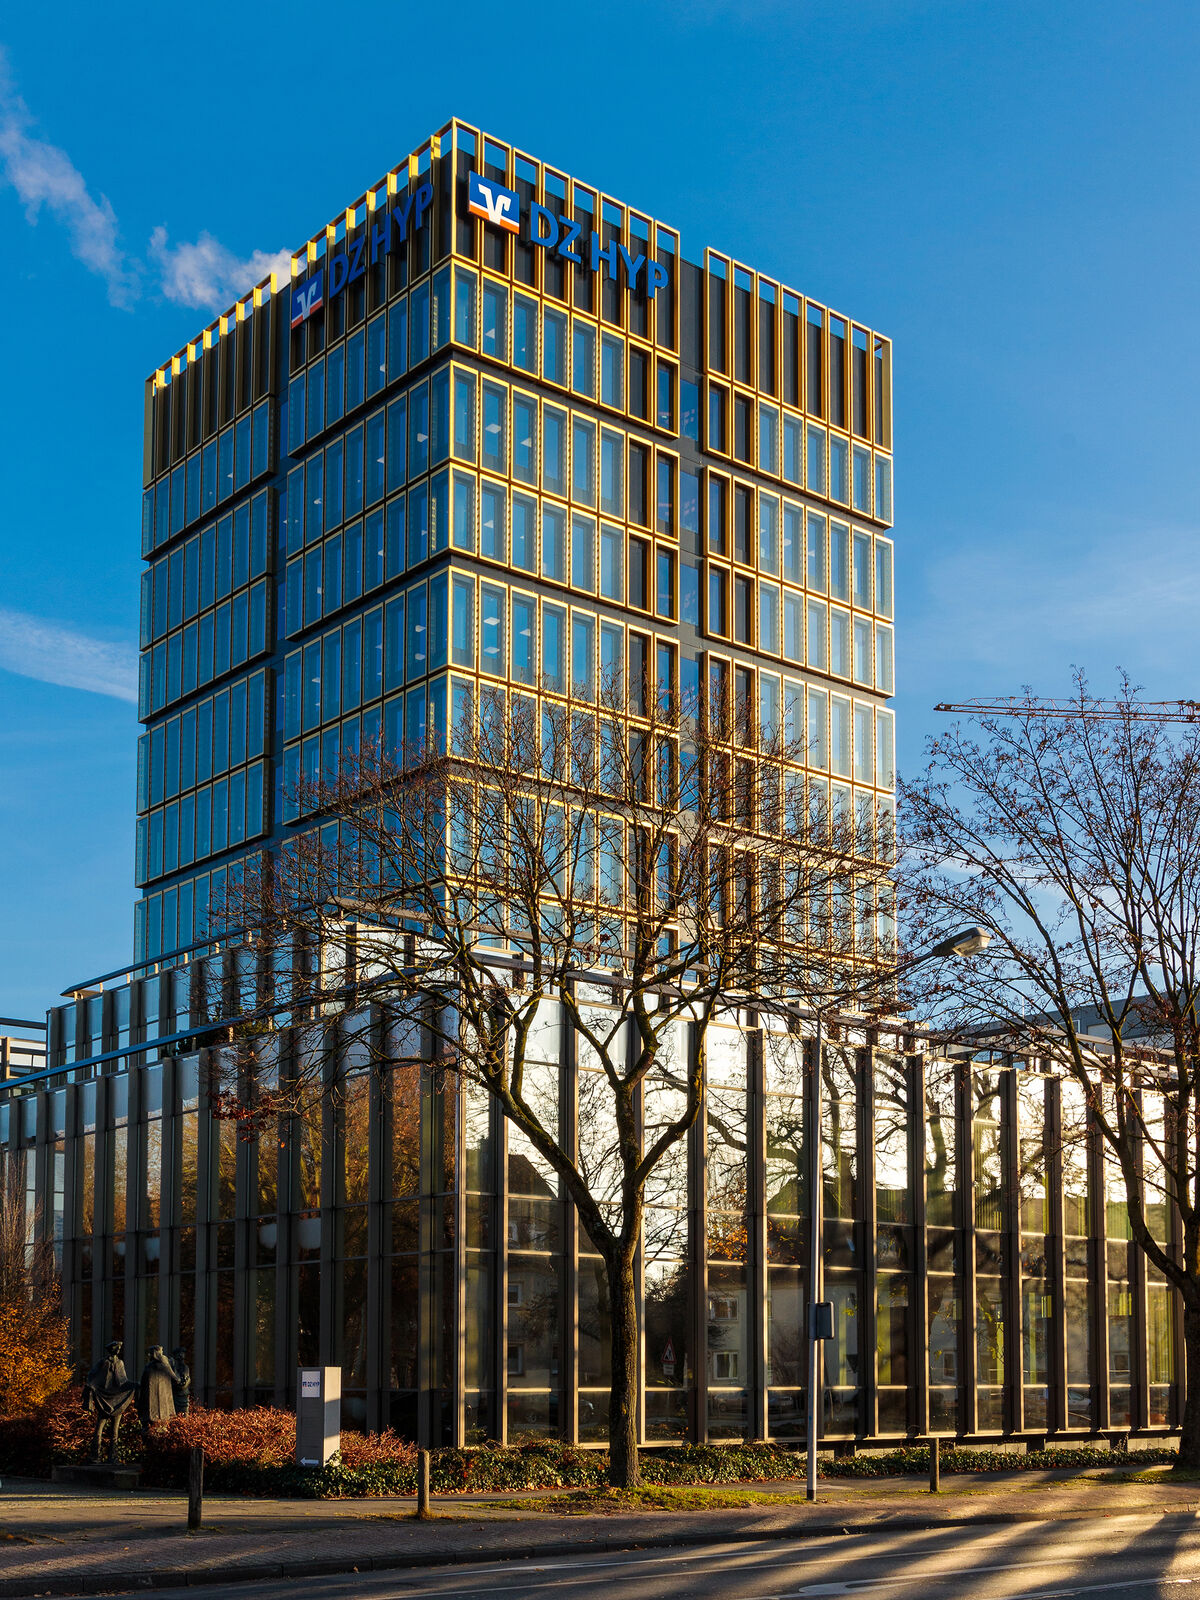 Company building with glass facade of the merged WGZ BANK in Münster, Germany